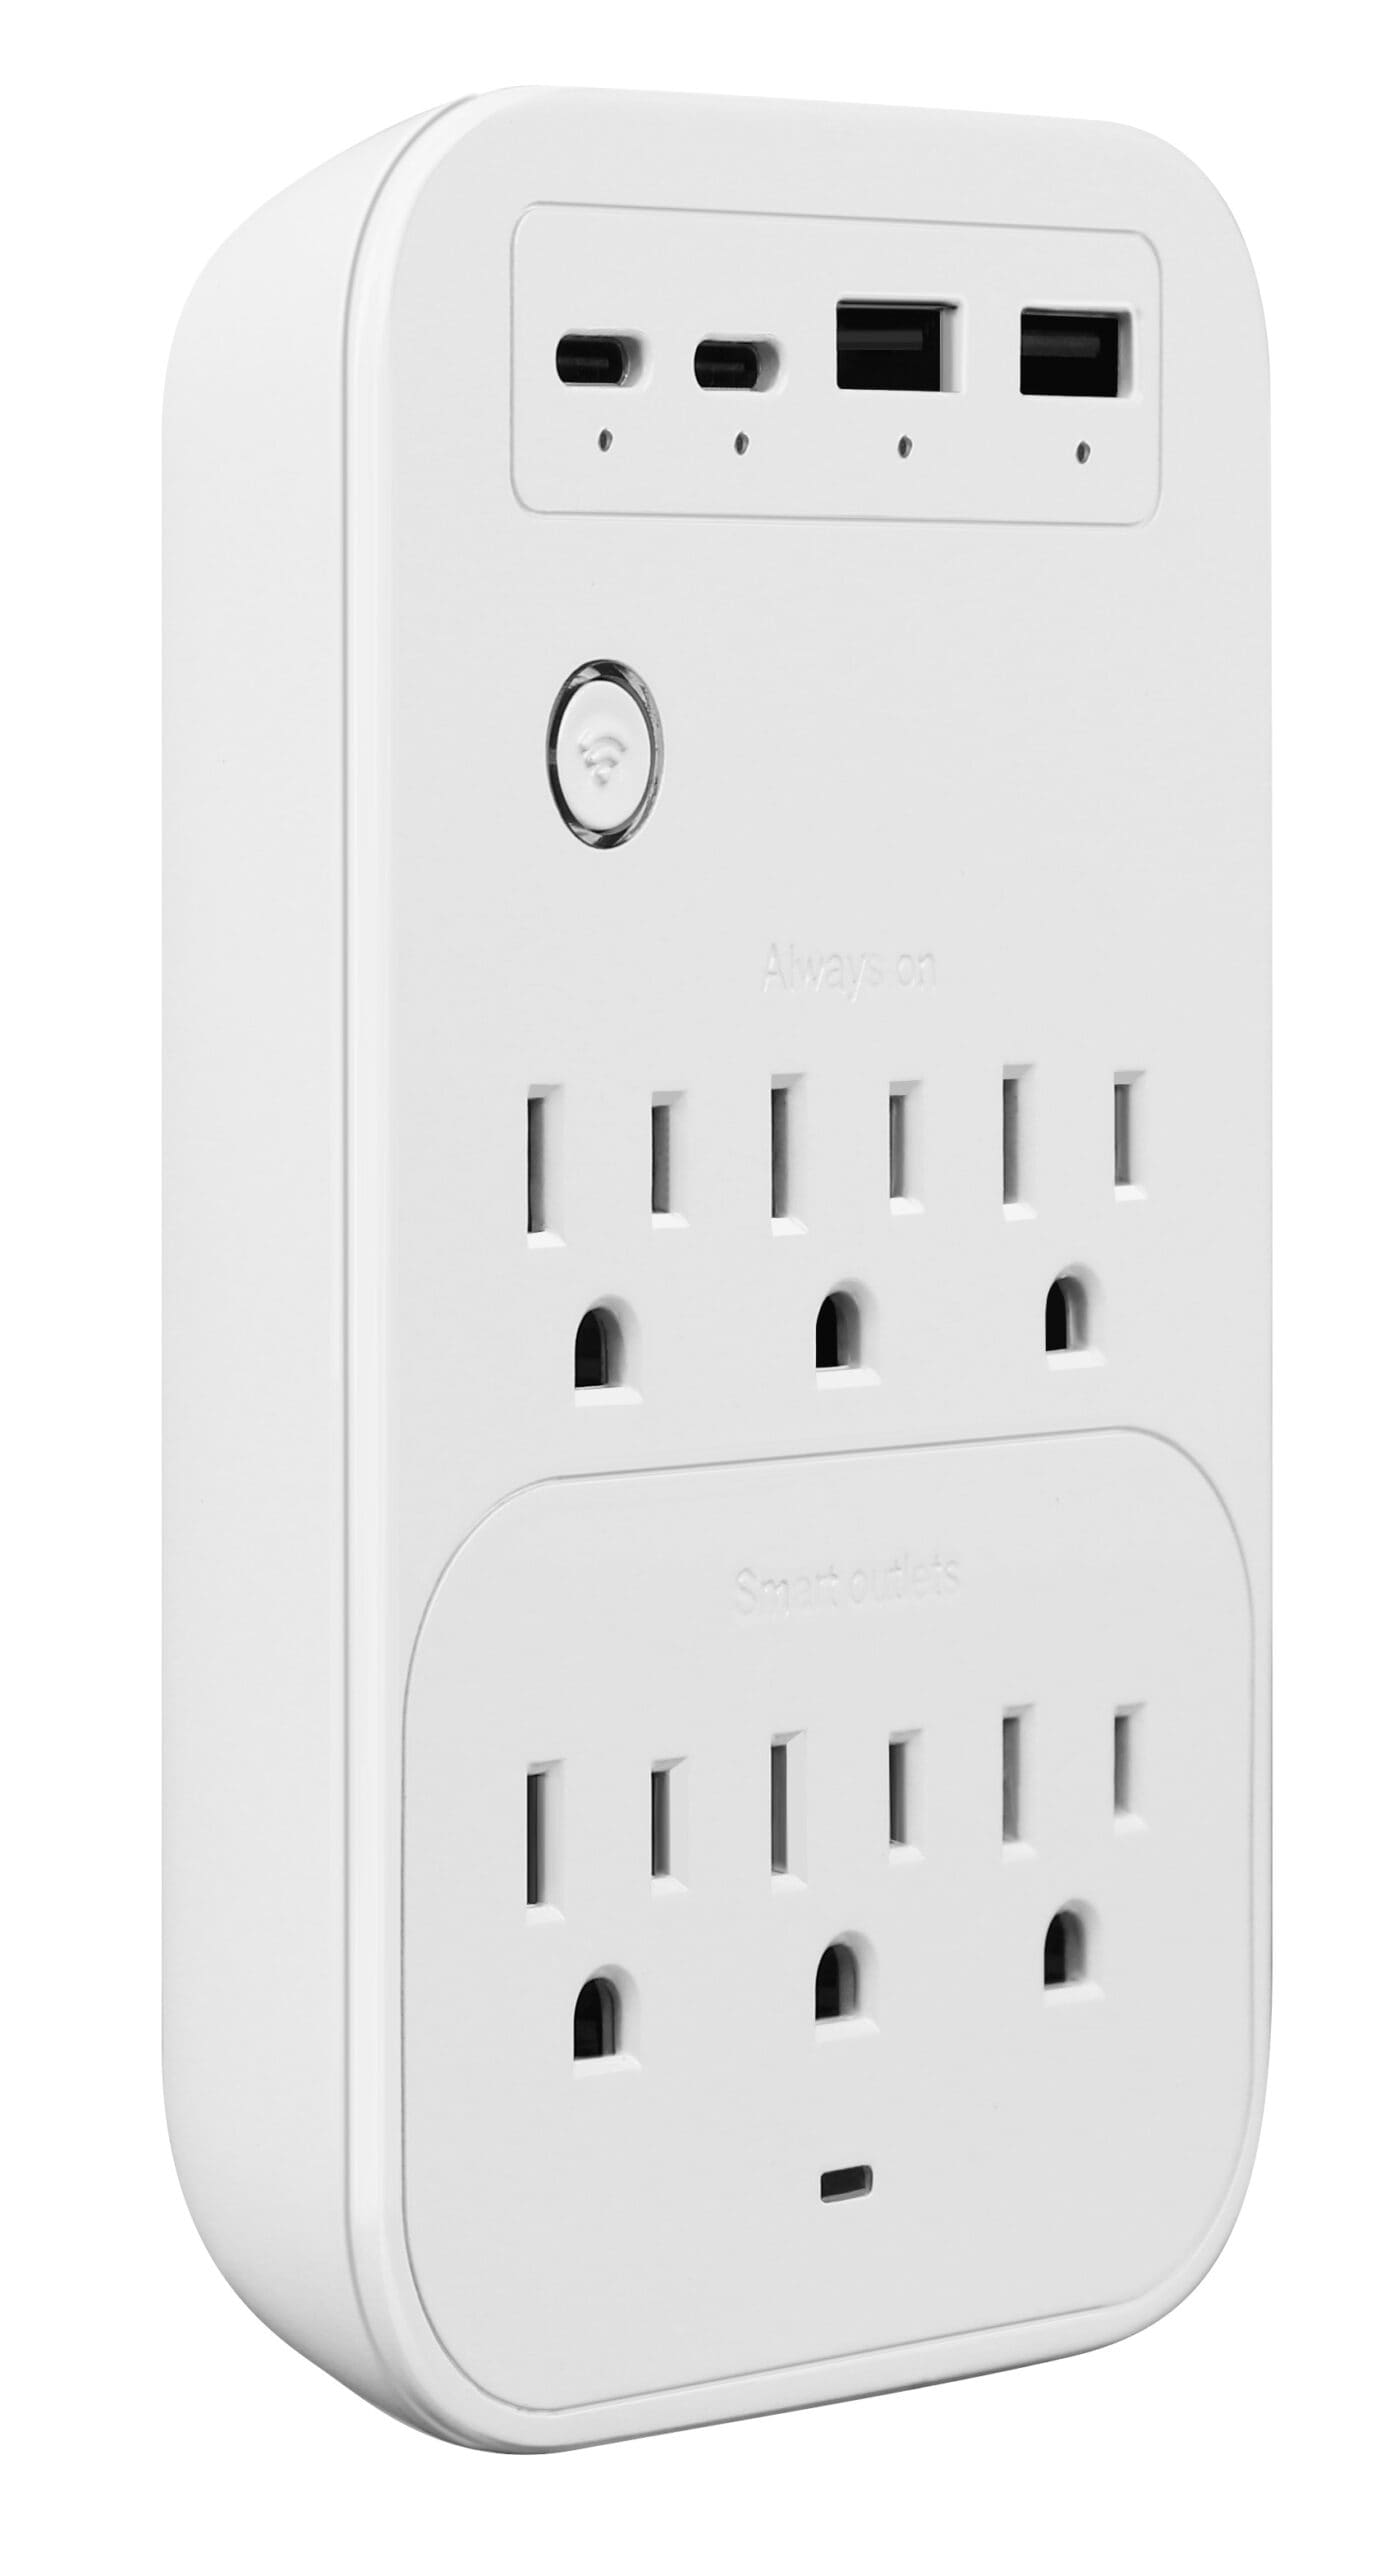 Feit Electric Wall Receptacle with USB Ports, 4-pack